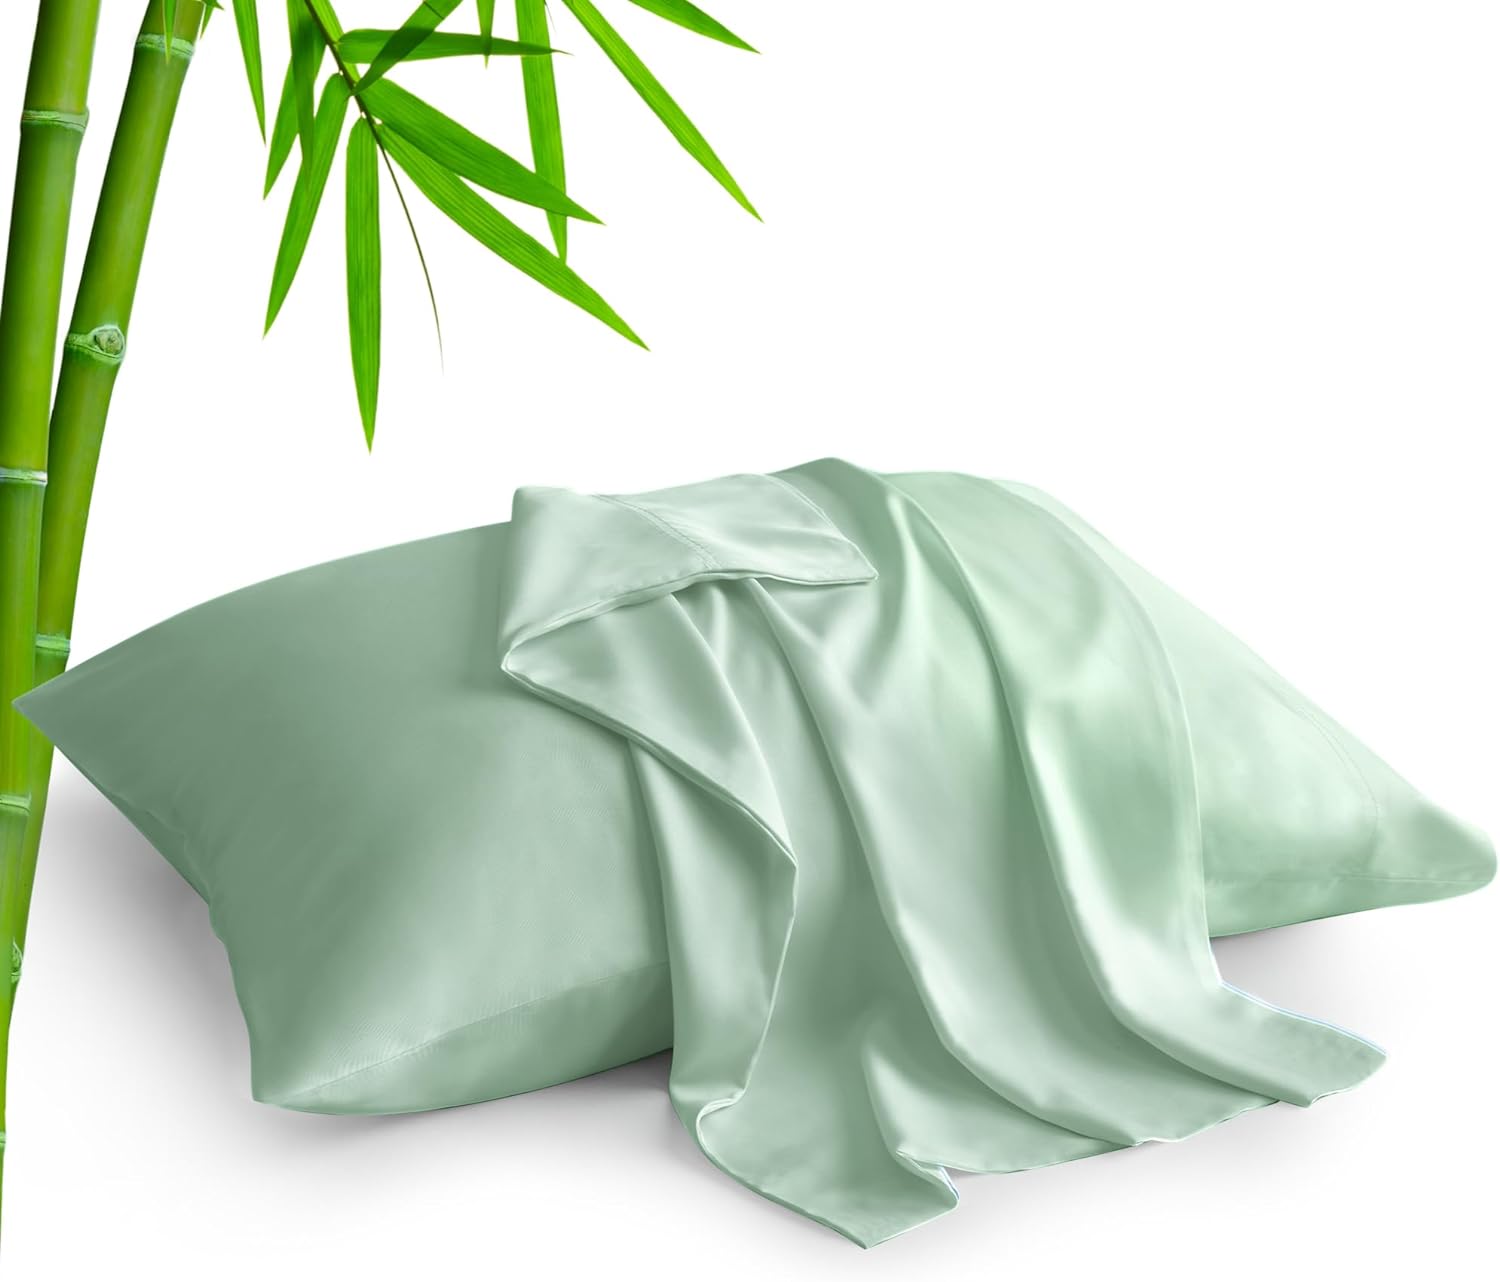 Fits my pillow well, is a lovely color, is soft and silky. Perfect for my needs.